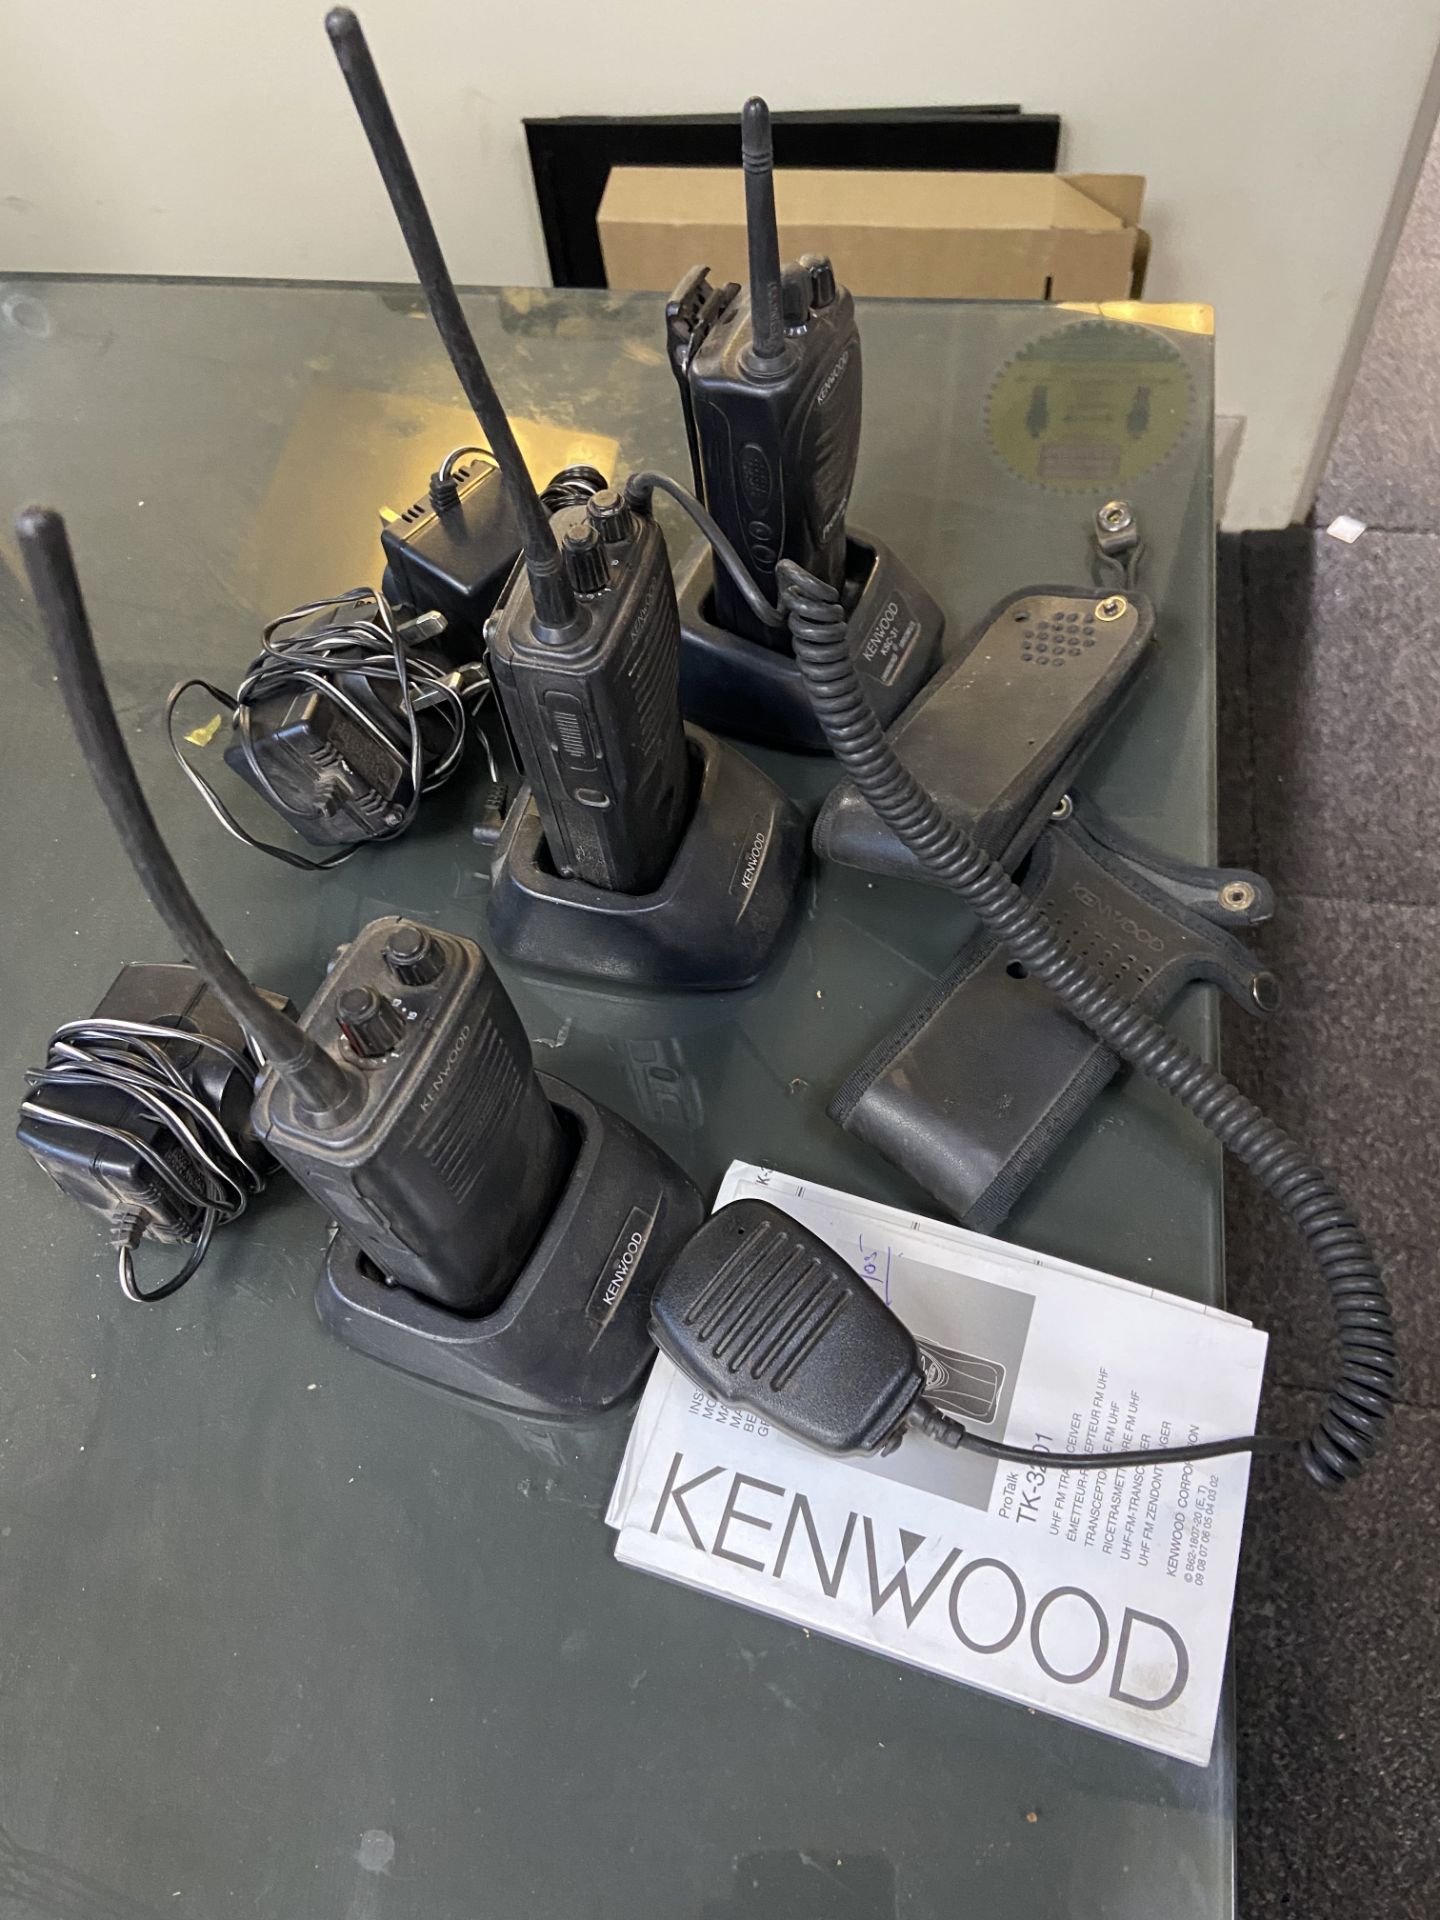 Three Kenwood radios model TK3202 with batteries, charger and accessories - Image 2 of 2